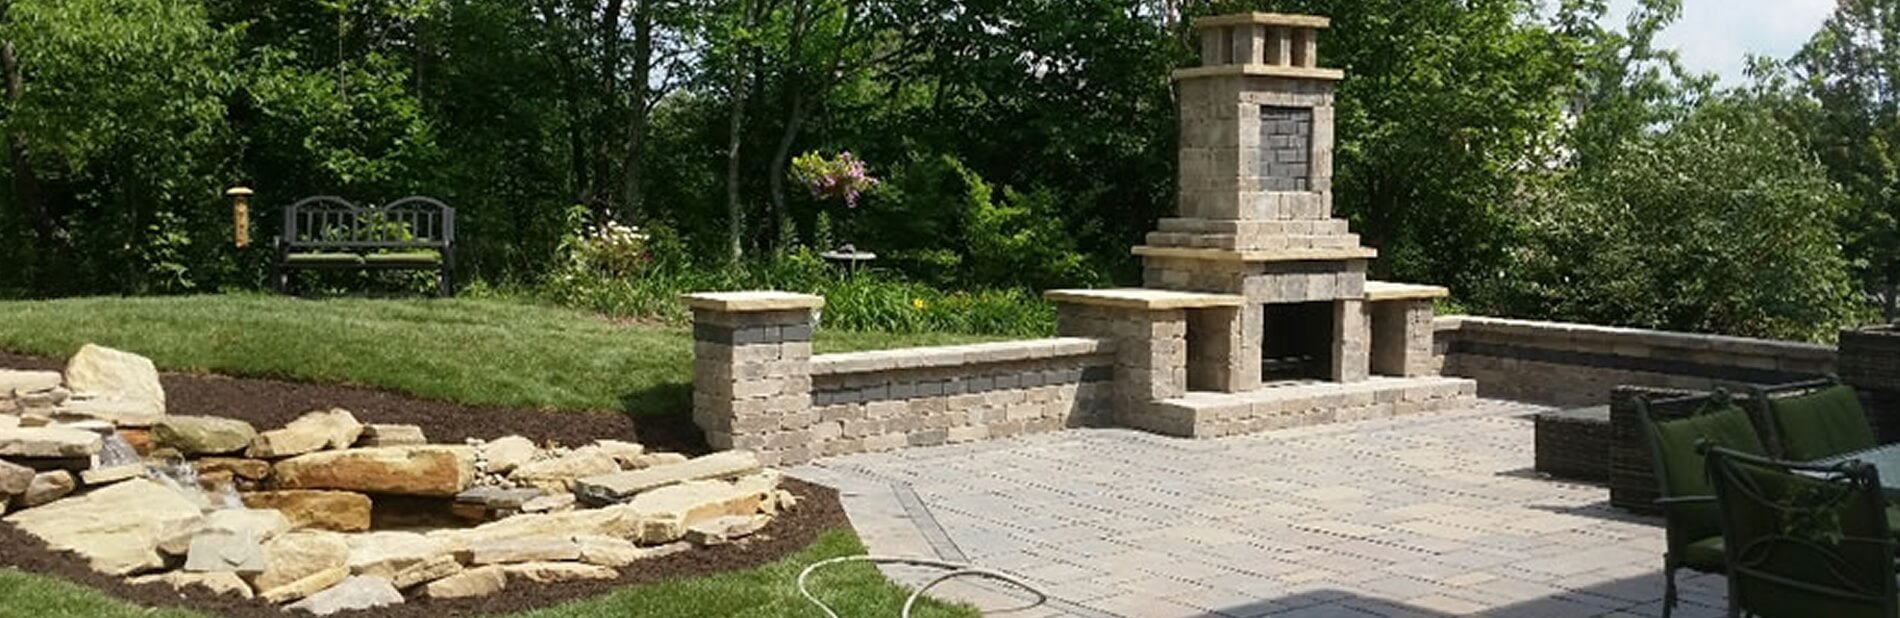 Outdoor Fireplaces Pittsburgh